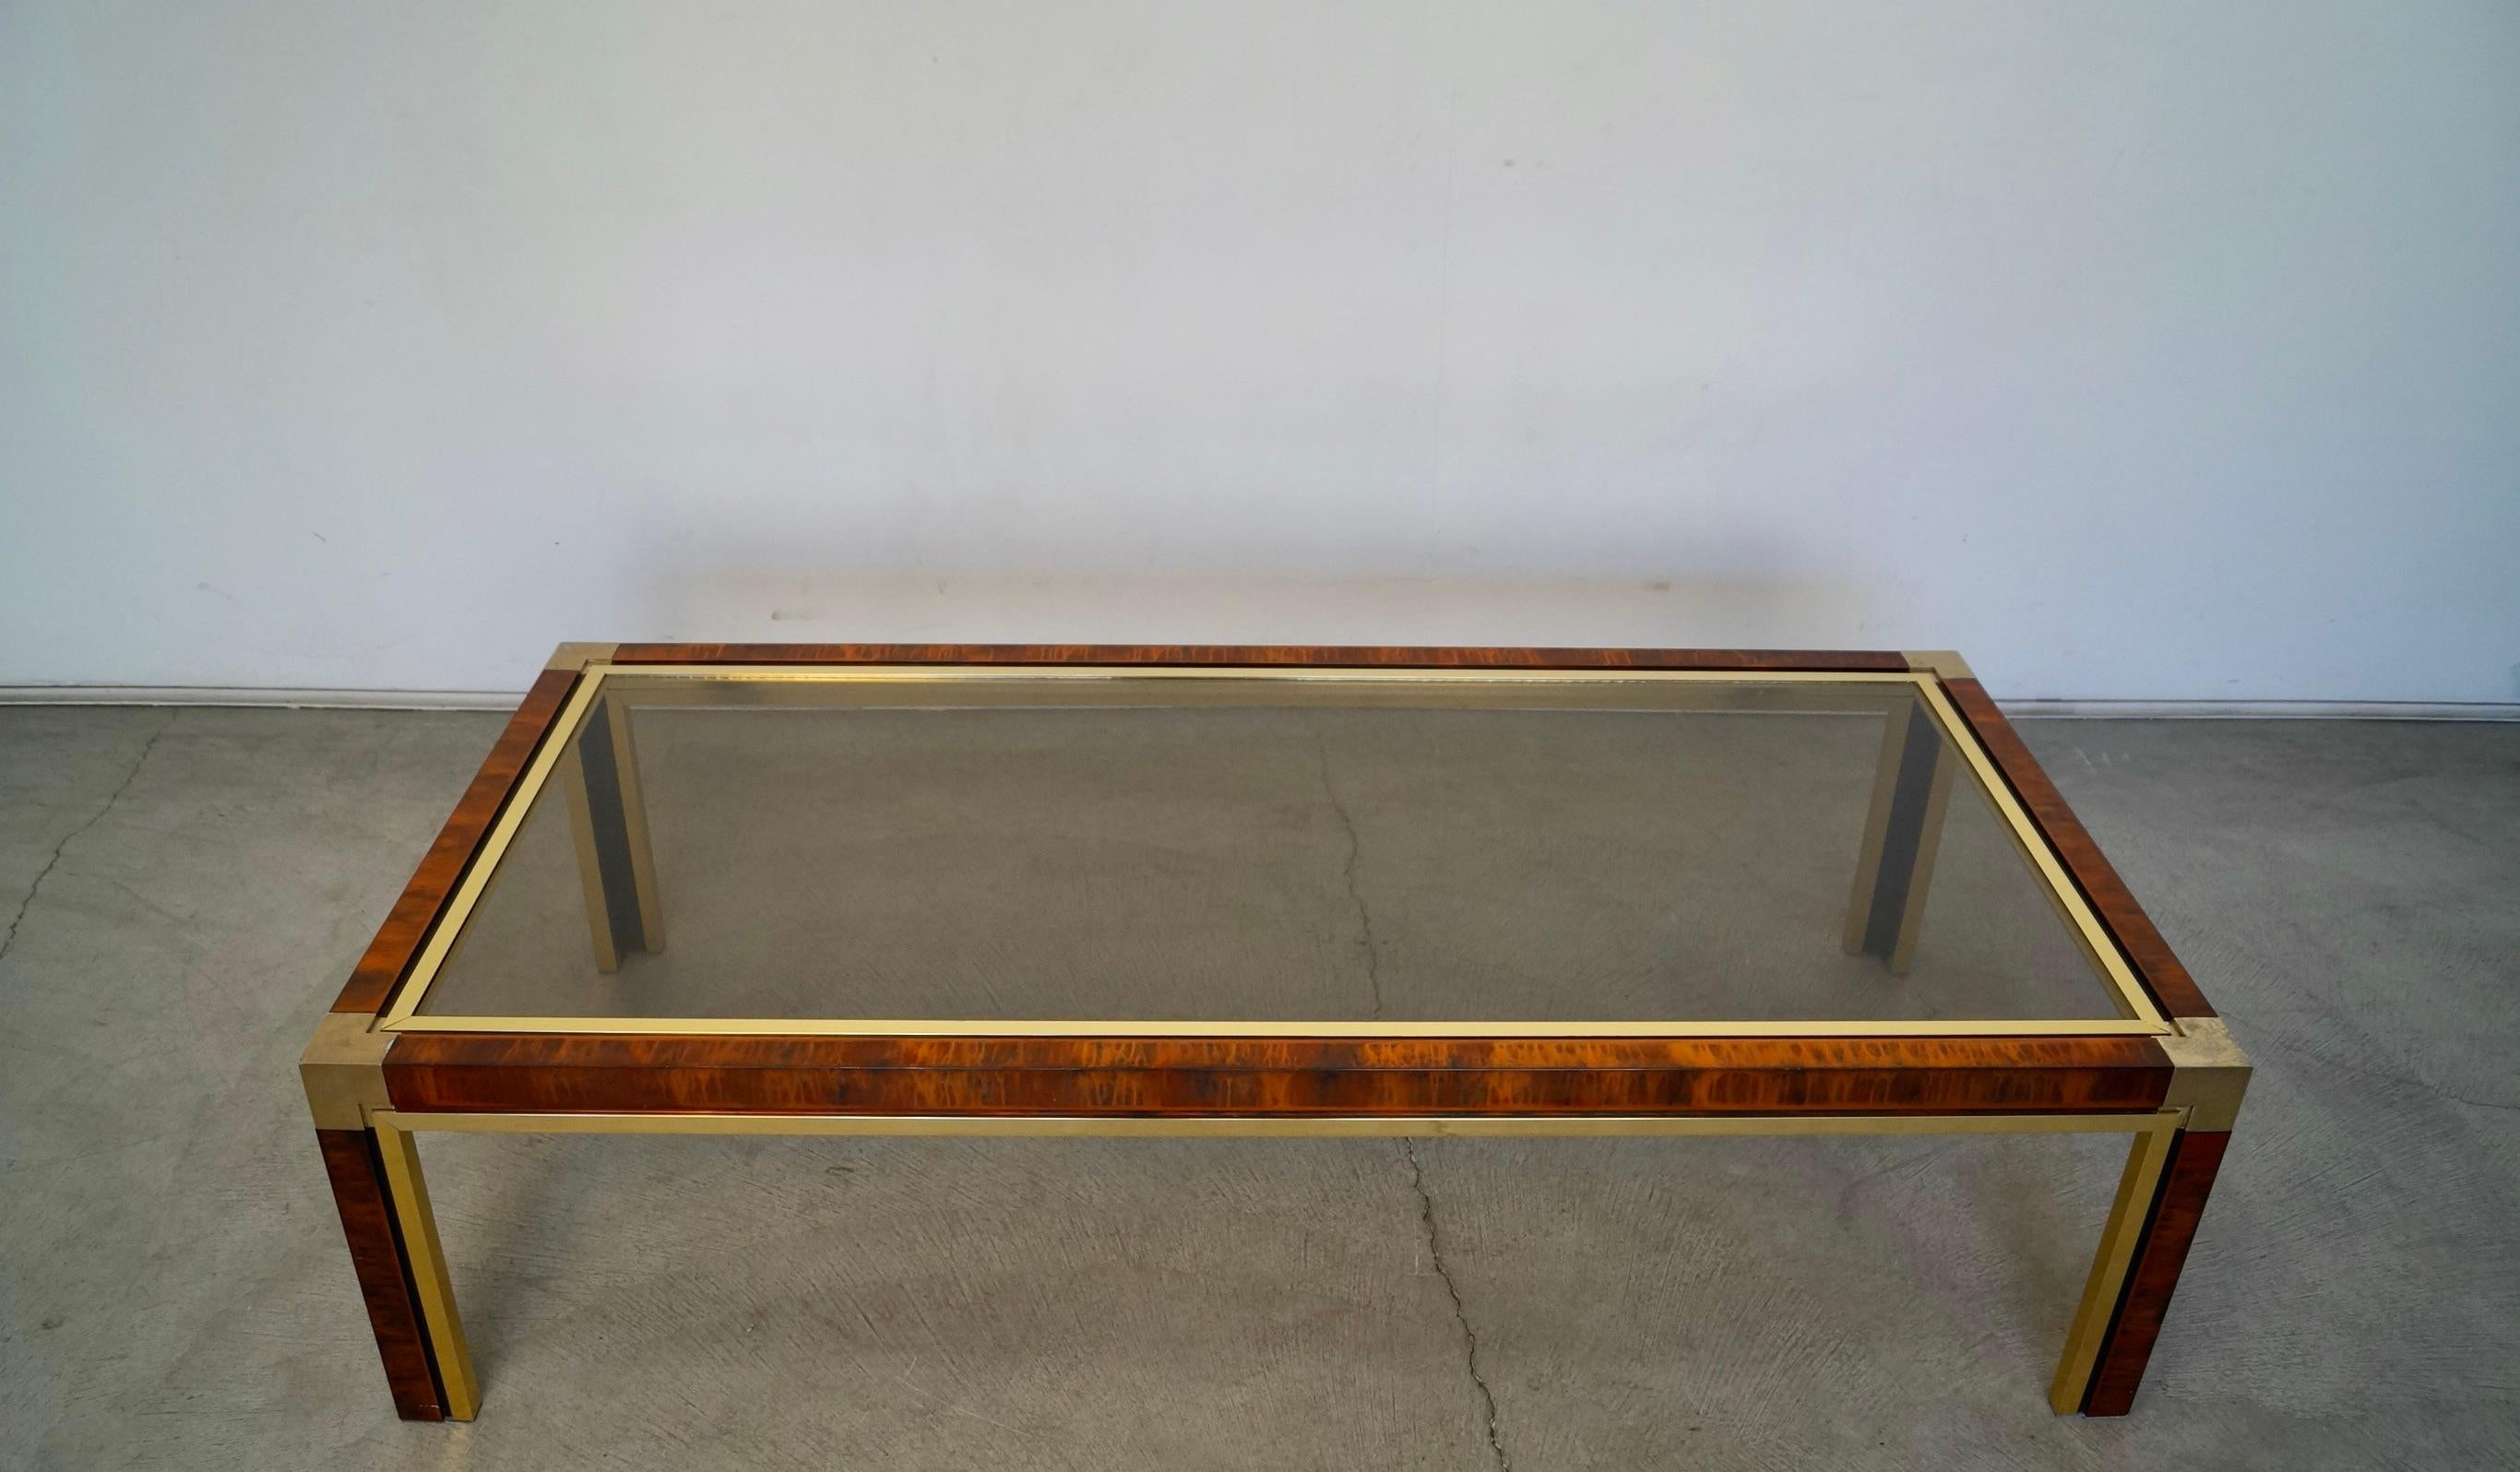 Vintage 1970s Hollywood Regency coffee table for sale. Very well made, and very unique. It's made of aluminum with brass trims and a smoked glass top. It's large, and in excellent condition. The aluminum frame has an acid finish design that is quite